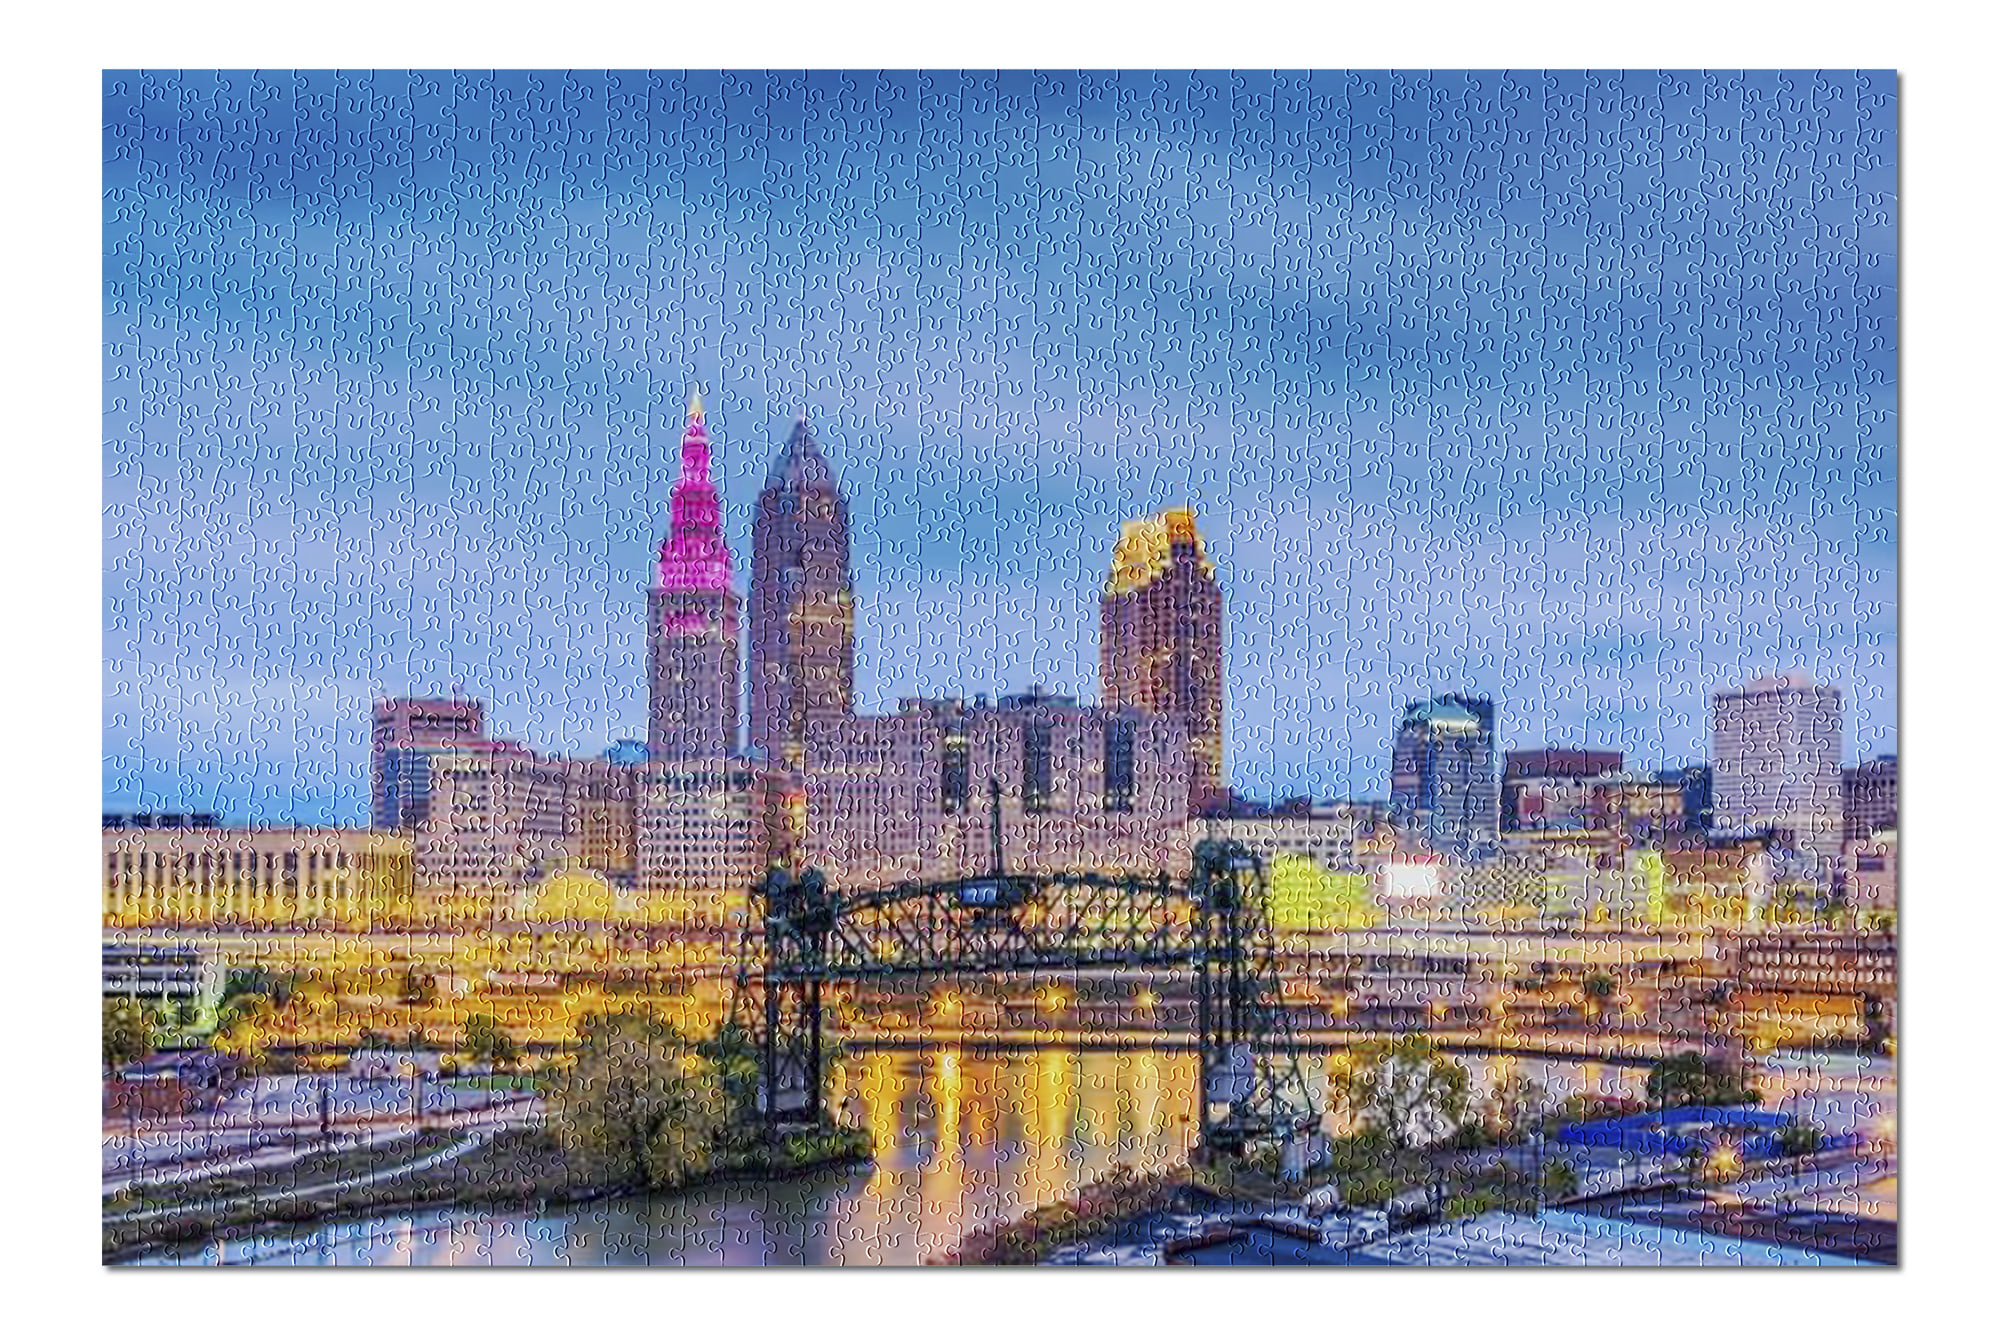 Cleveland Ohio City Skyline At Night With Lit Buildings 9004690